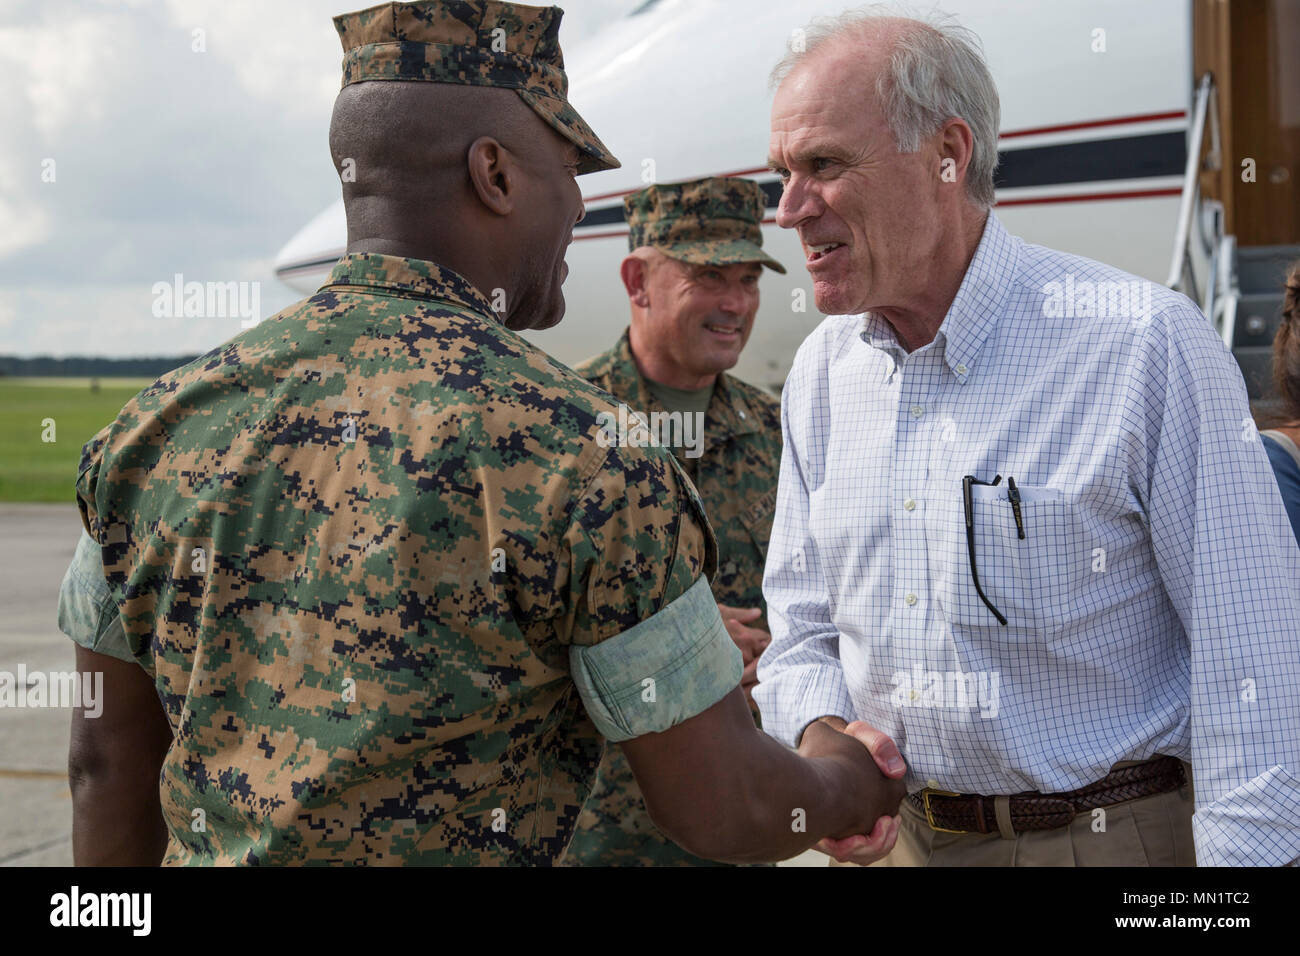 U.S. Marine Corps Sgt. Maj. Derrick N. Mays, command sergeant major of Marine Corps Air Station (MCAS) Beaufort, greets Secretary of the Navy, Mr. Richard V. Spencer aboard Beaufort, S.C., Aug 10, 2017. Spencer is visiting MCAS Beaufort to tour VMFAT-501 and observe the F-35 aircraft. (Marine Corps photo by Lance Cpl. Erin R. Ramsay/ Released) Stock Photo